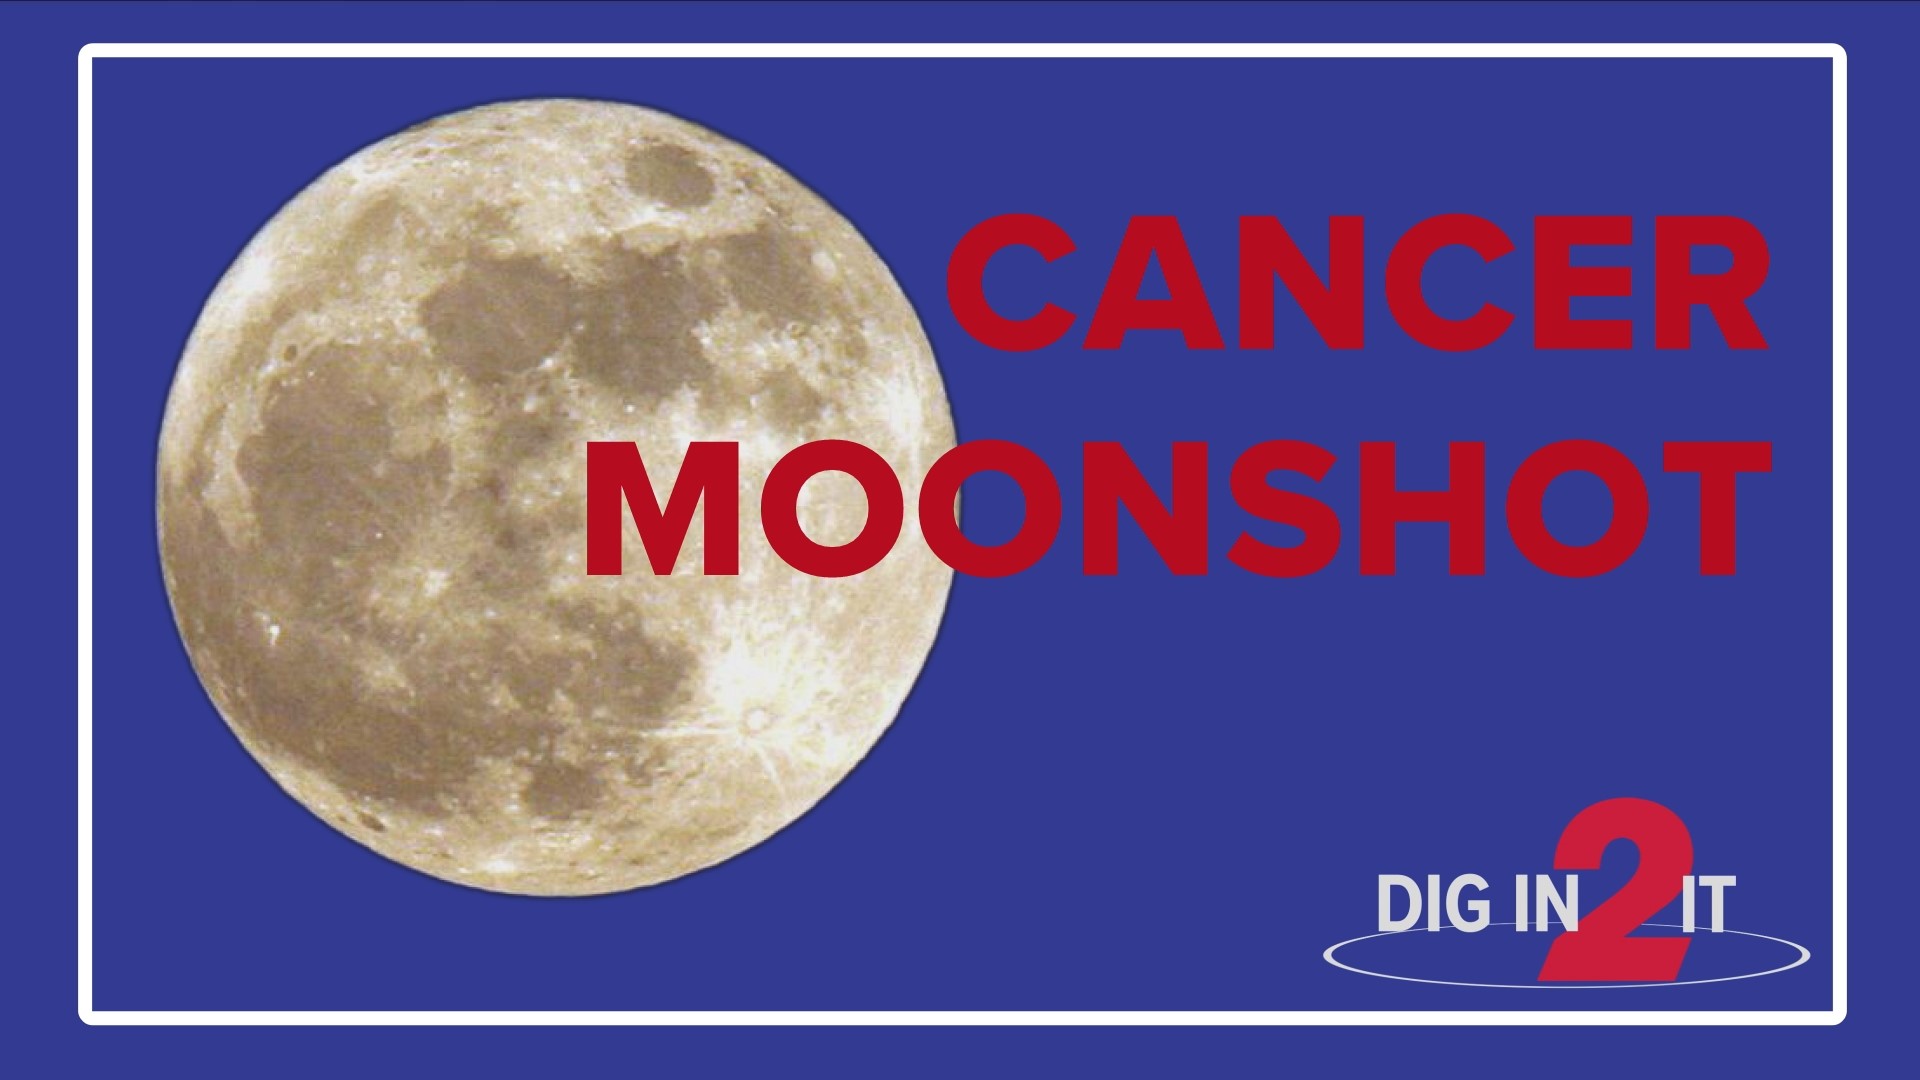 The National Cancer Institute says it is launching a major study to identify blood tests for early cancer detection. What else is Moonshot doing?